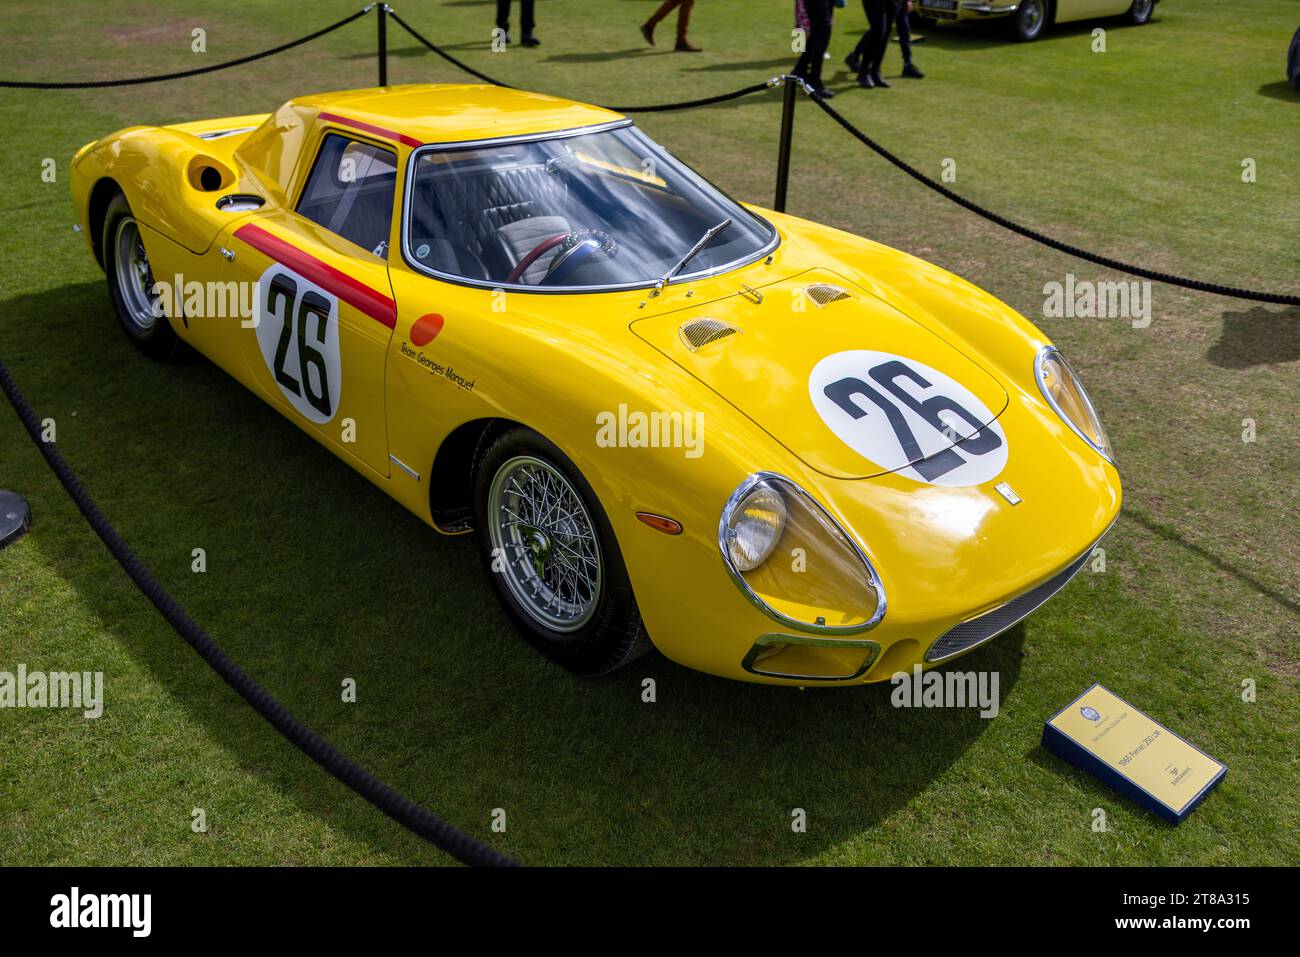 1965 Ferrari 250 LM, on display at the Salon Privé Concours d’Elégance motor show held at Blenheim Palace. Stock Photo